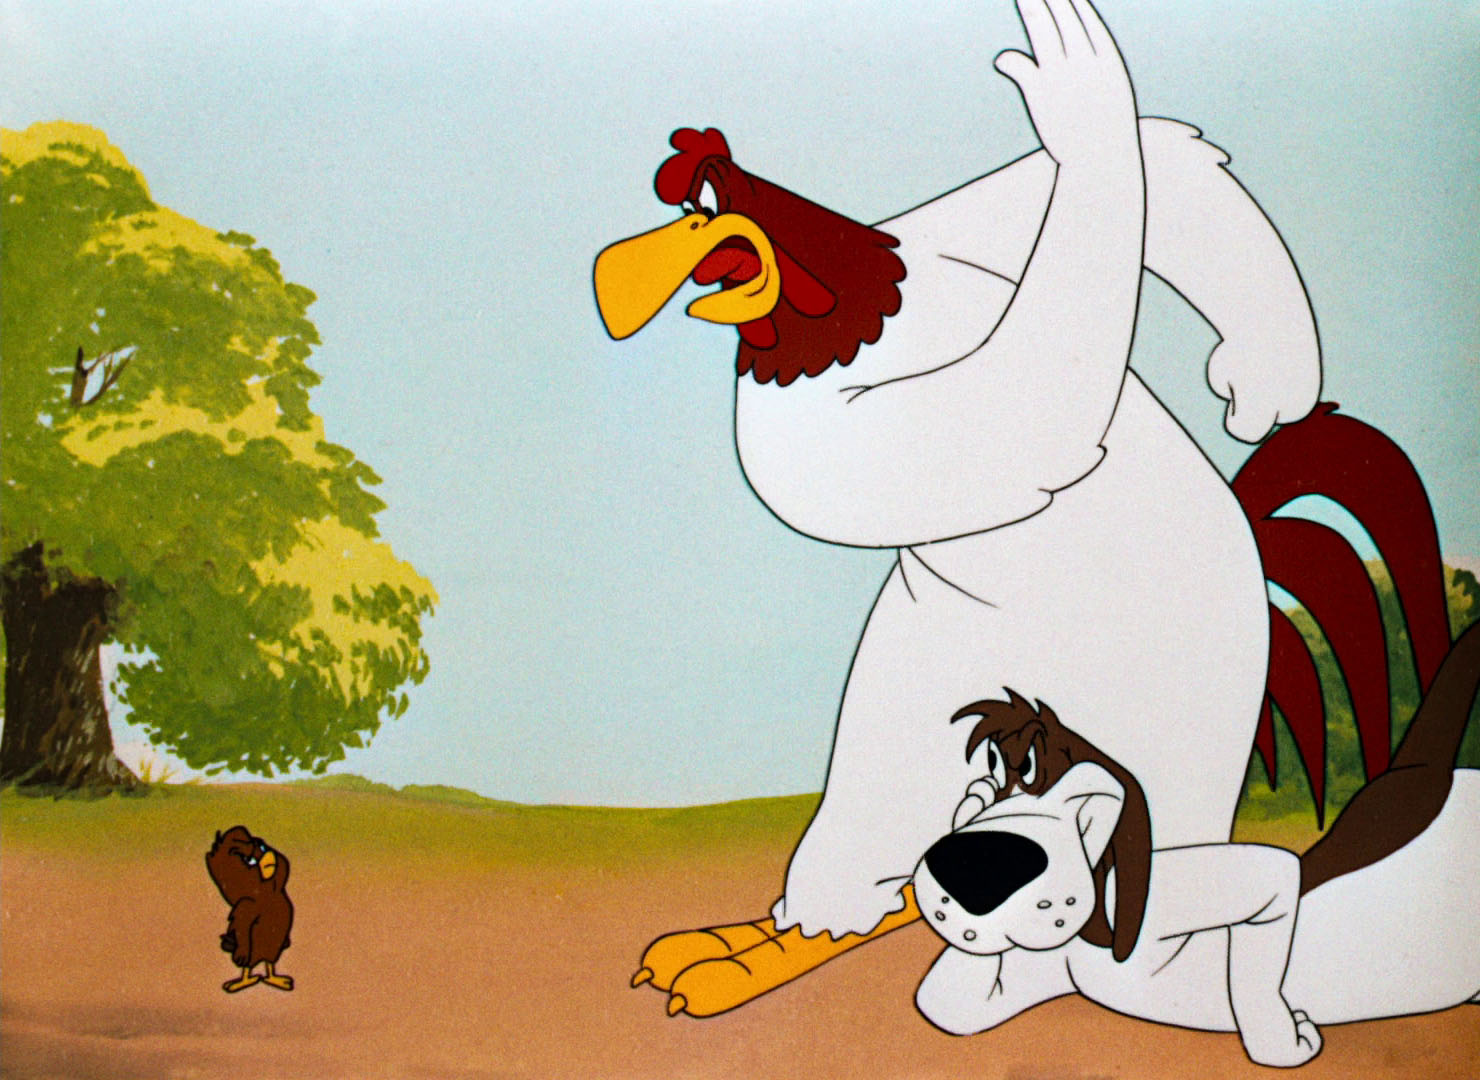 Looney Tunes Pictures: "The Foghorn Leghorn"